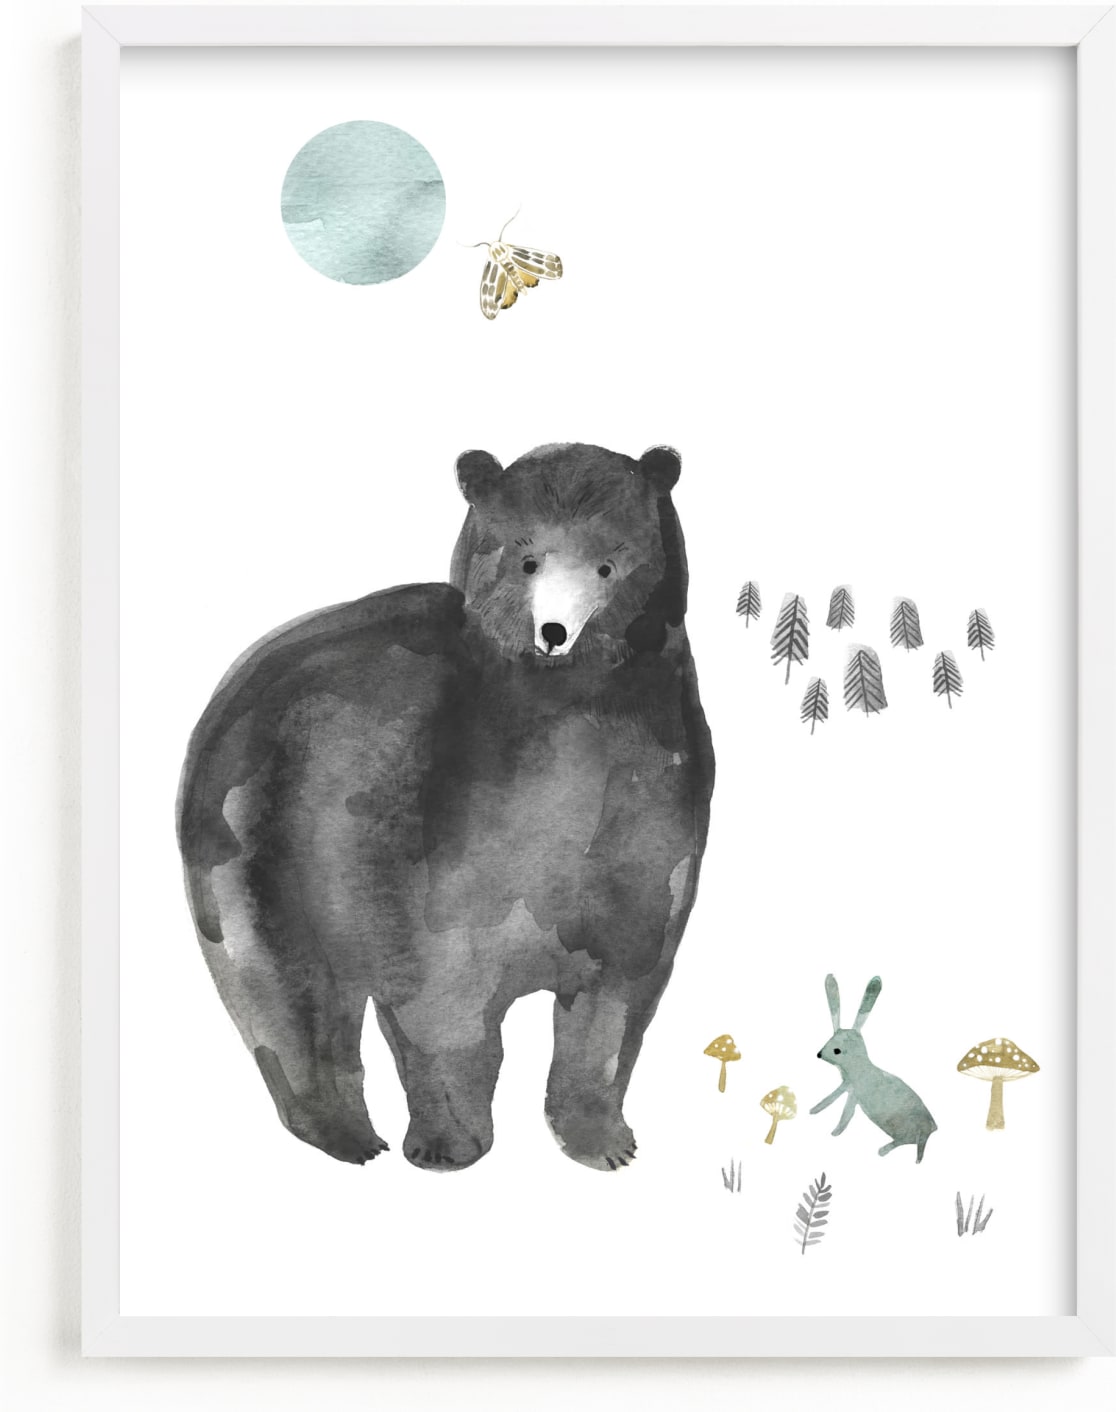 This is a blue kids wall art by Emilie Simpson called Bear and Bunny.